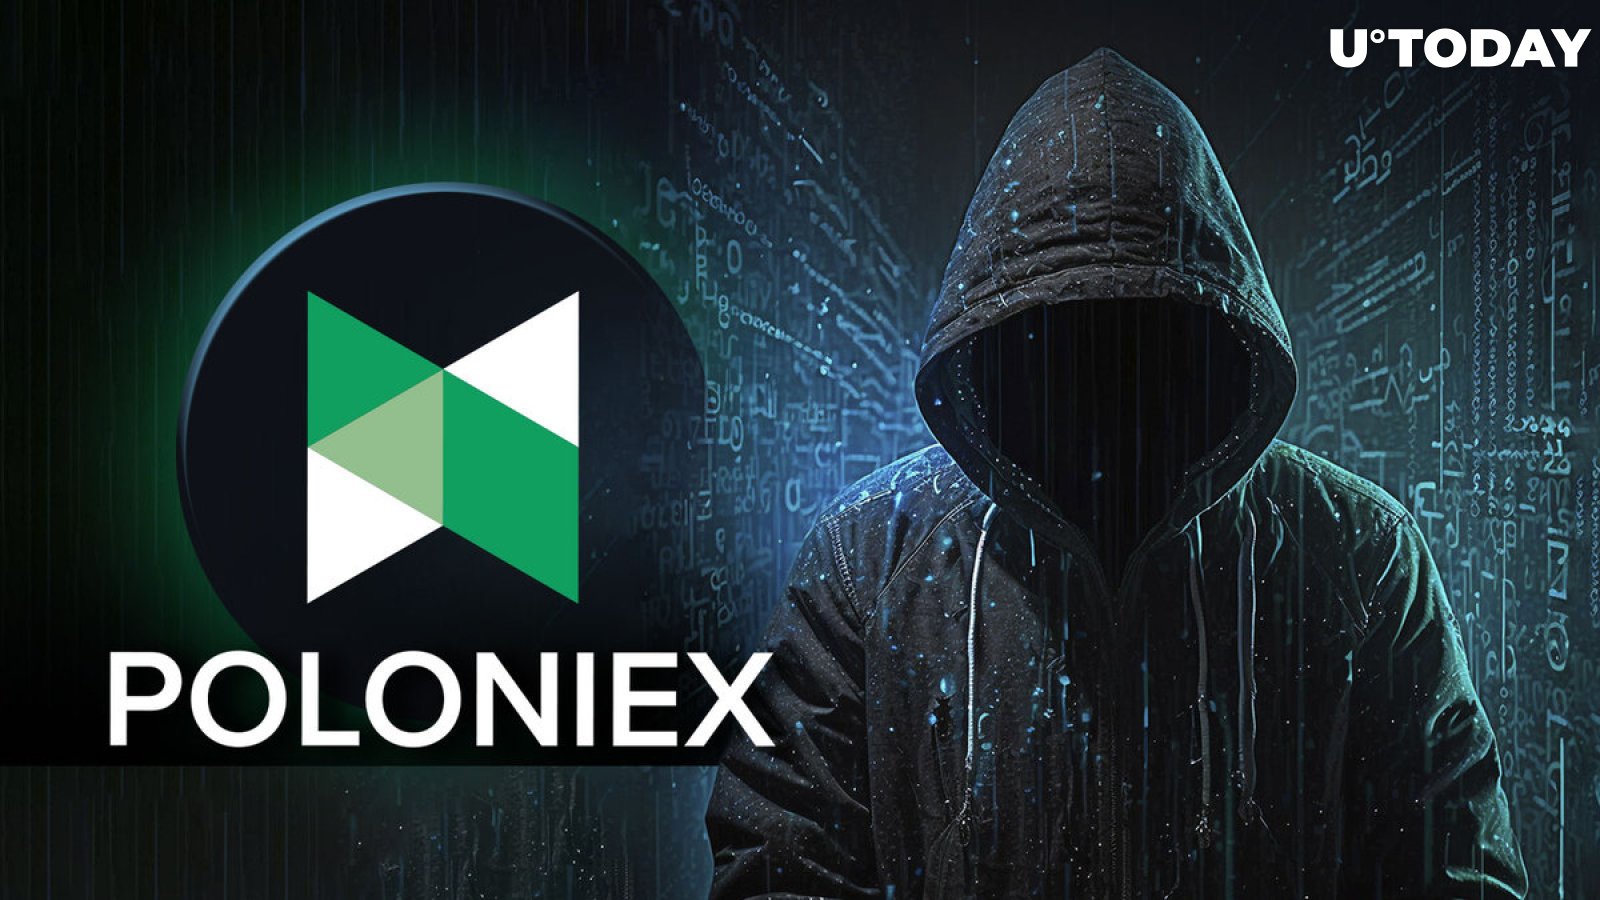 Poloniex Hacker Might Be Identified, $10M Bounty Offered